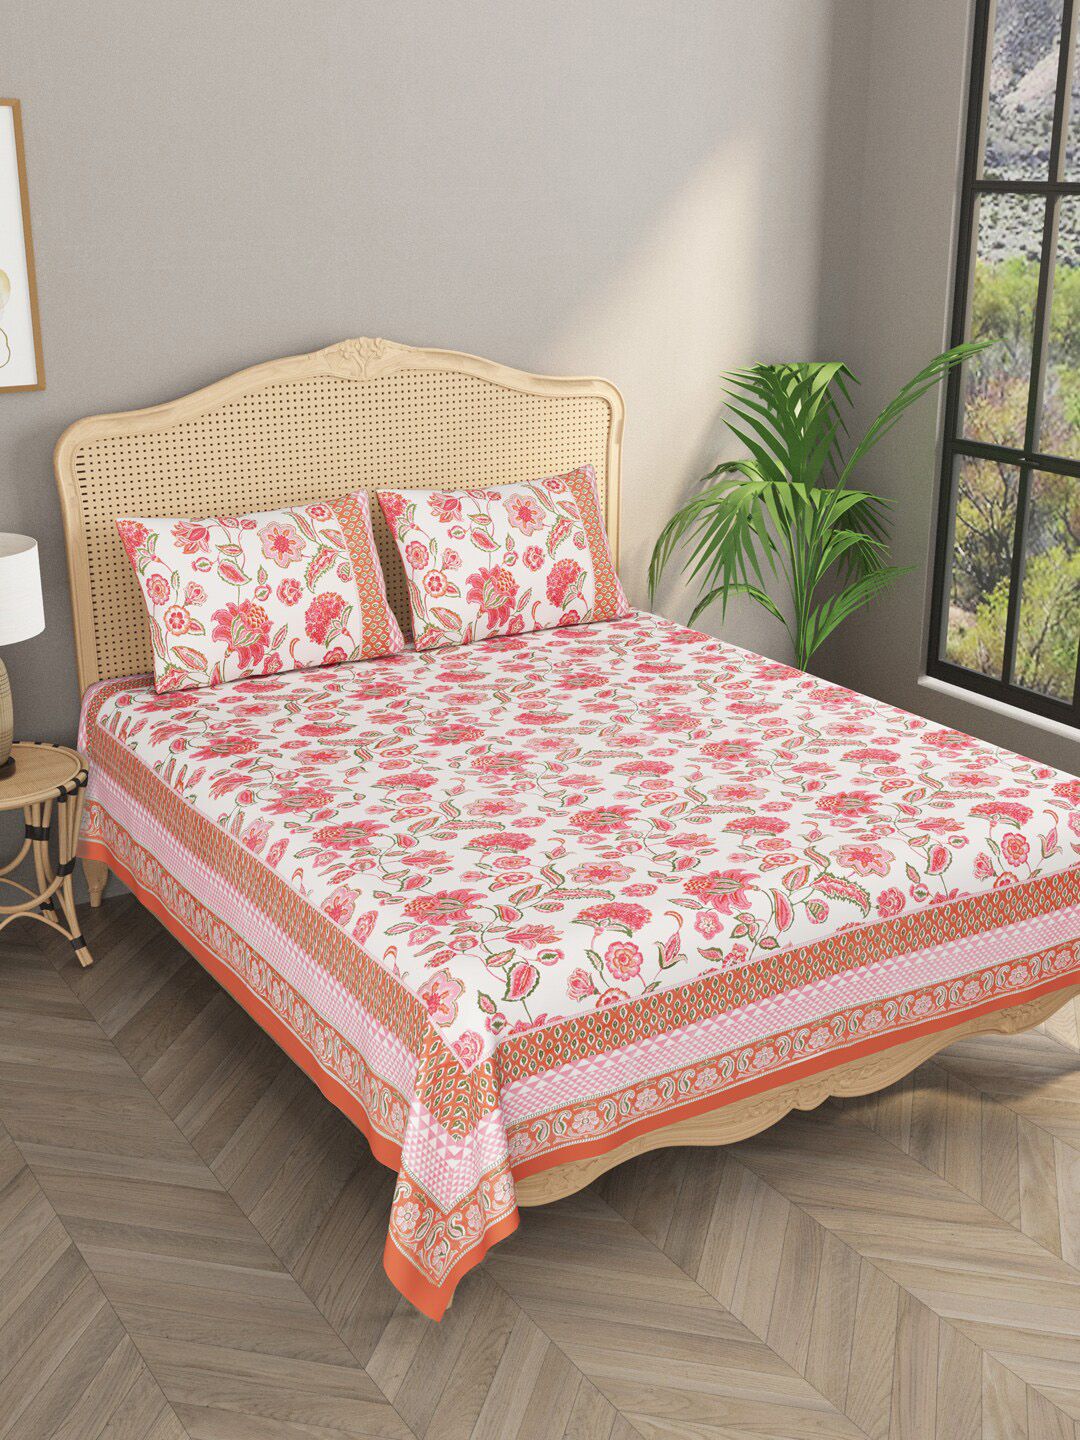 Gulaab Jaipur Coral & White 600 TC King Floral Cotton Bedsheet with 2 Pillow Covers Price in India